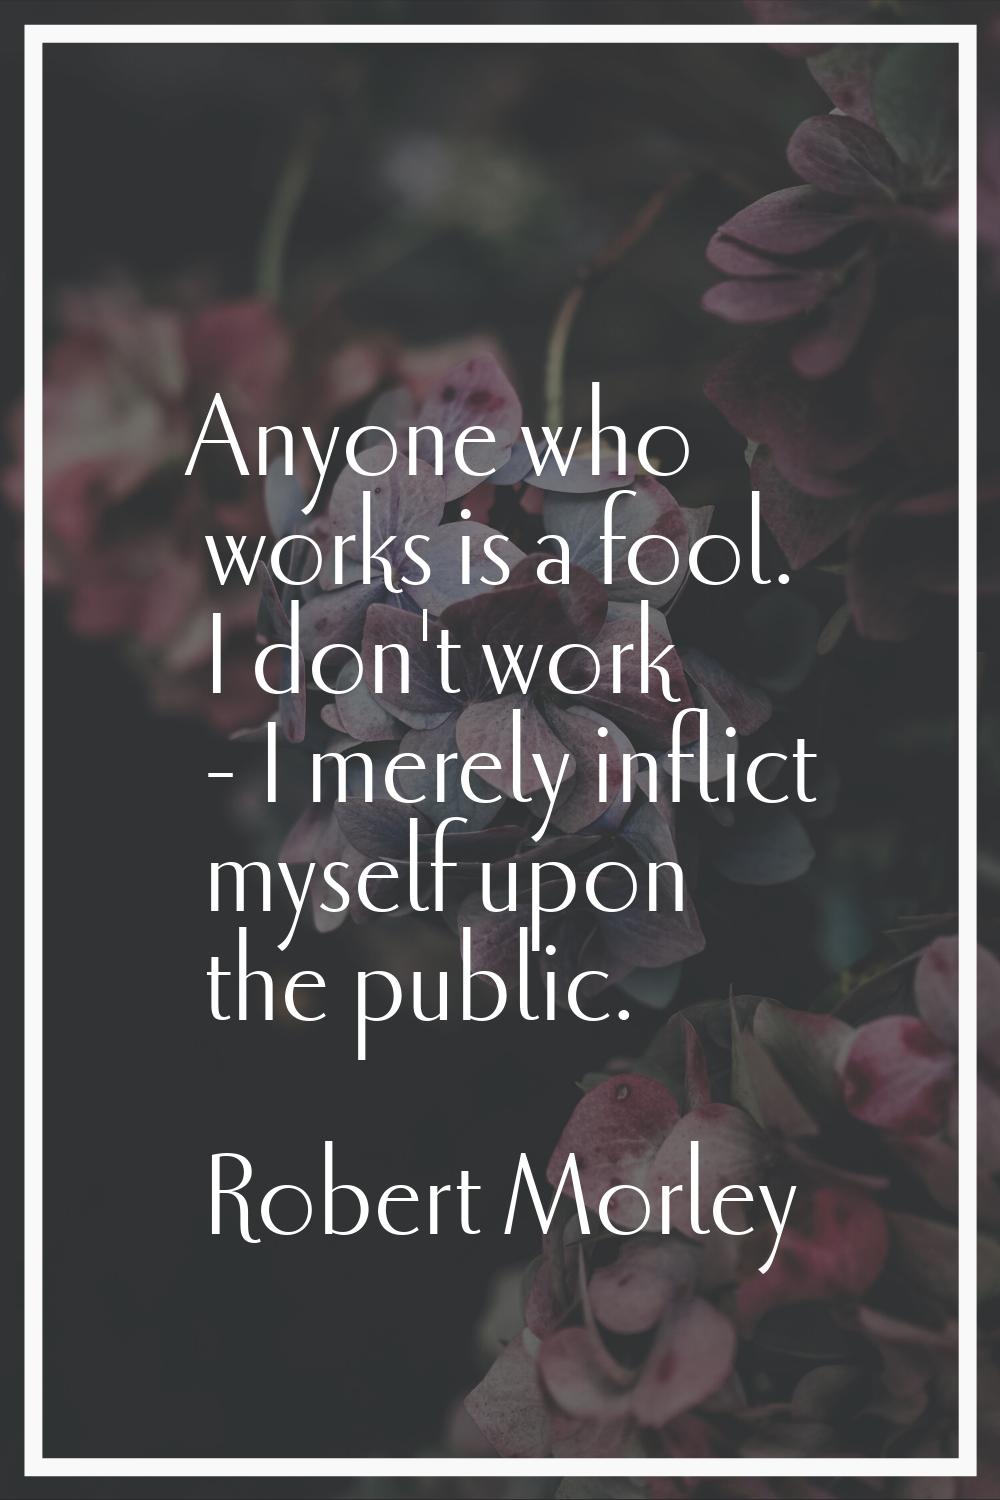 Anyone who works is a fool. I don't work - I merely inflict myself upon the public.